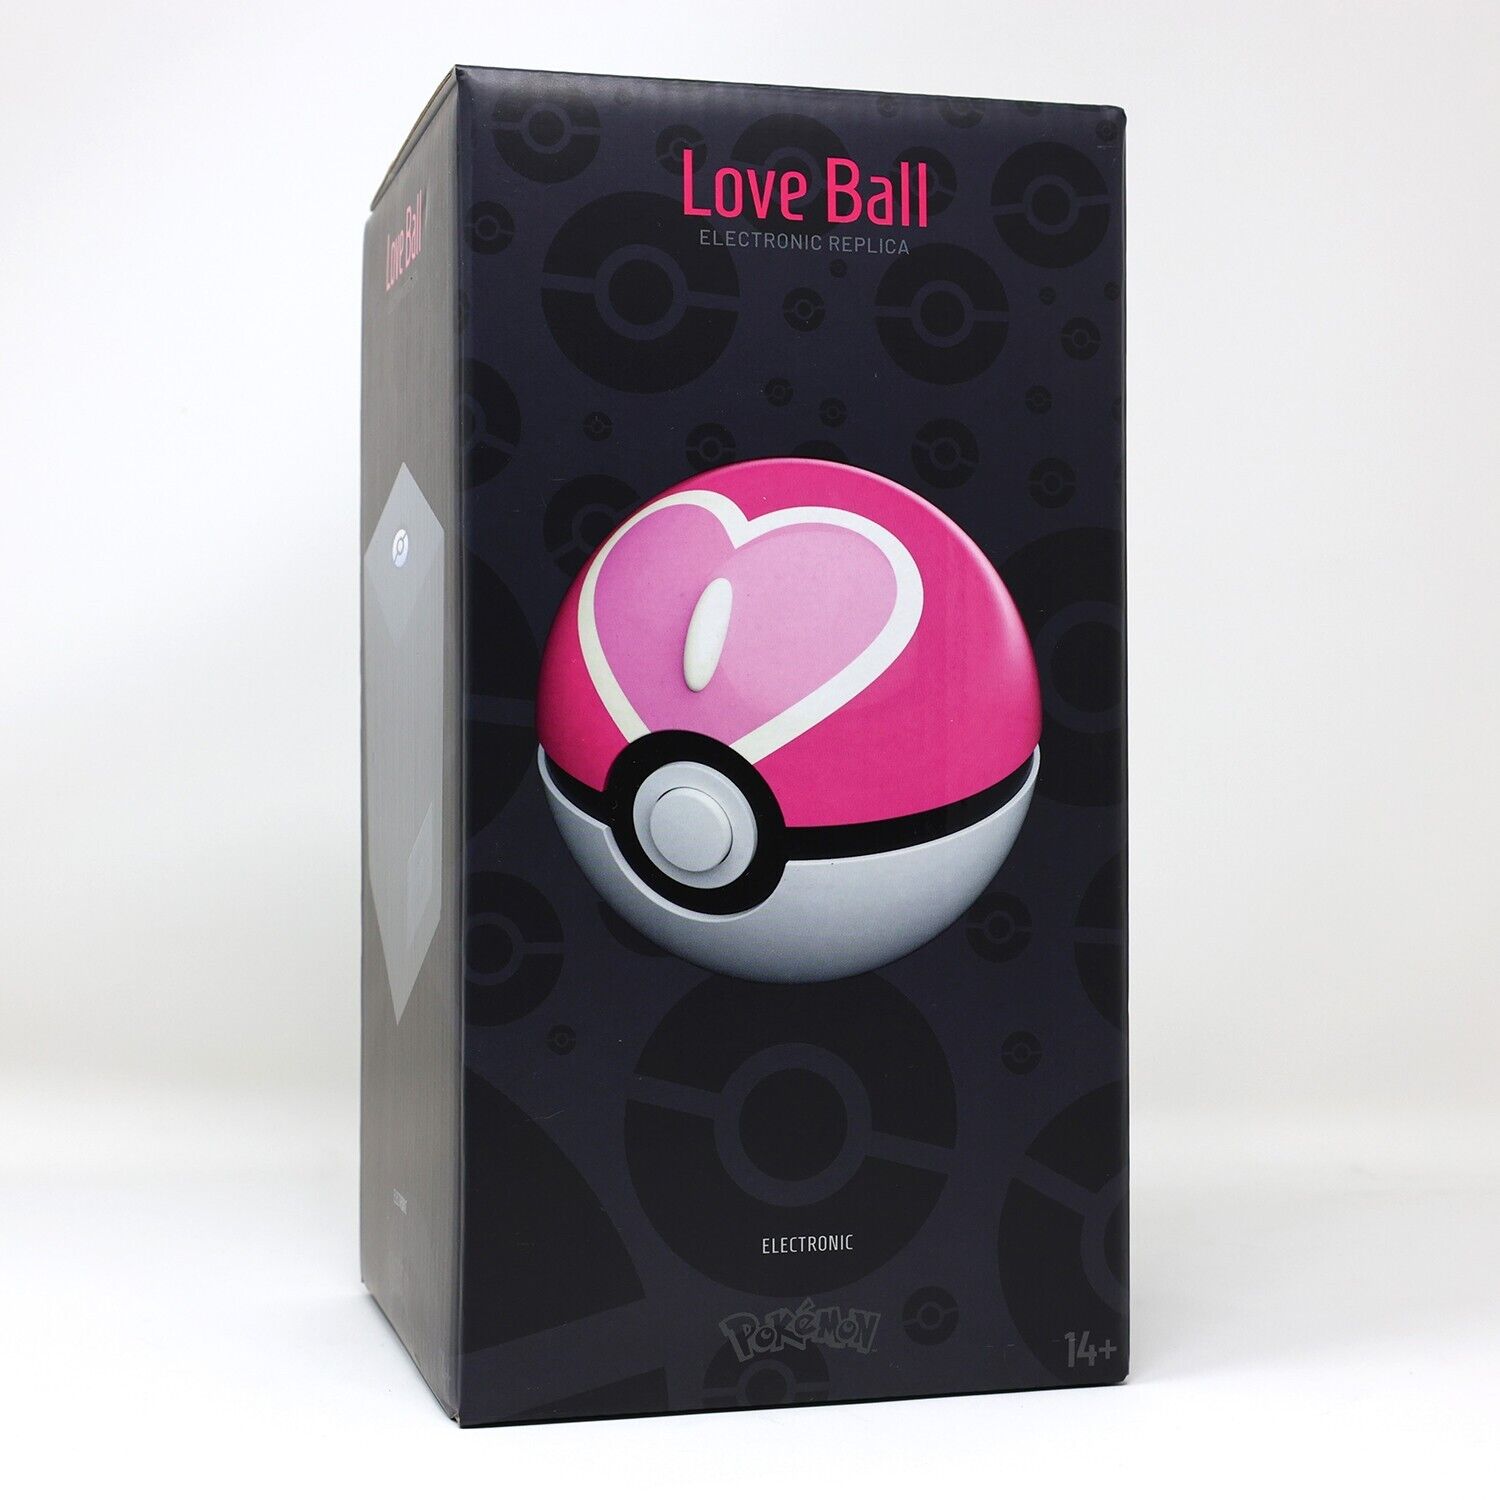 Pokemon Love Ball The Wand Company Officially Licensed Pink Figure Pokeball